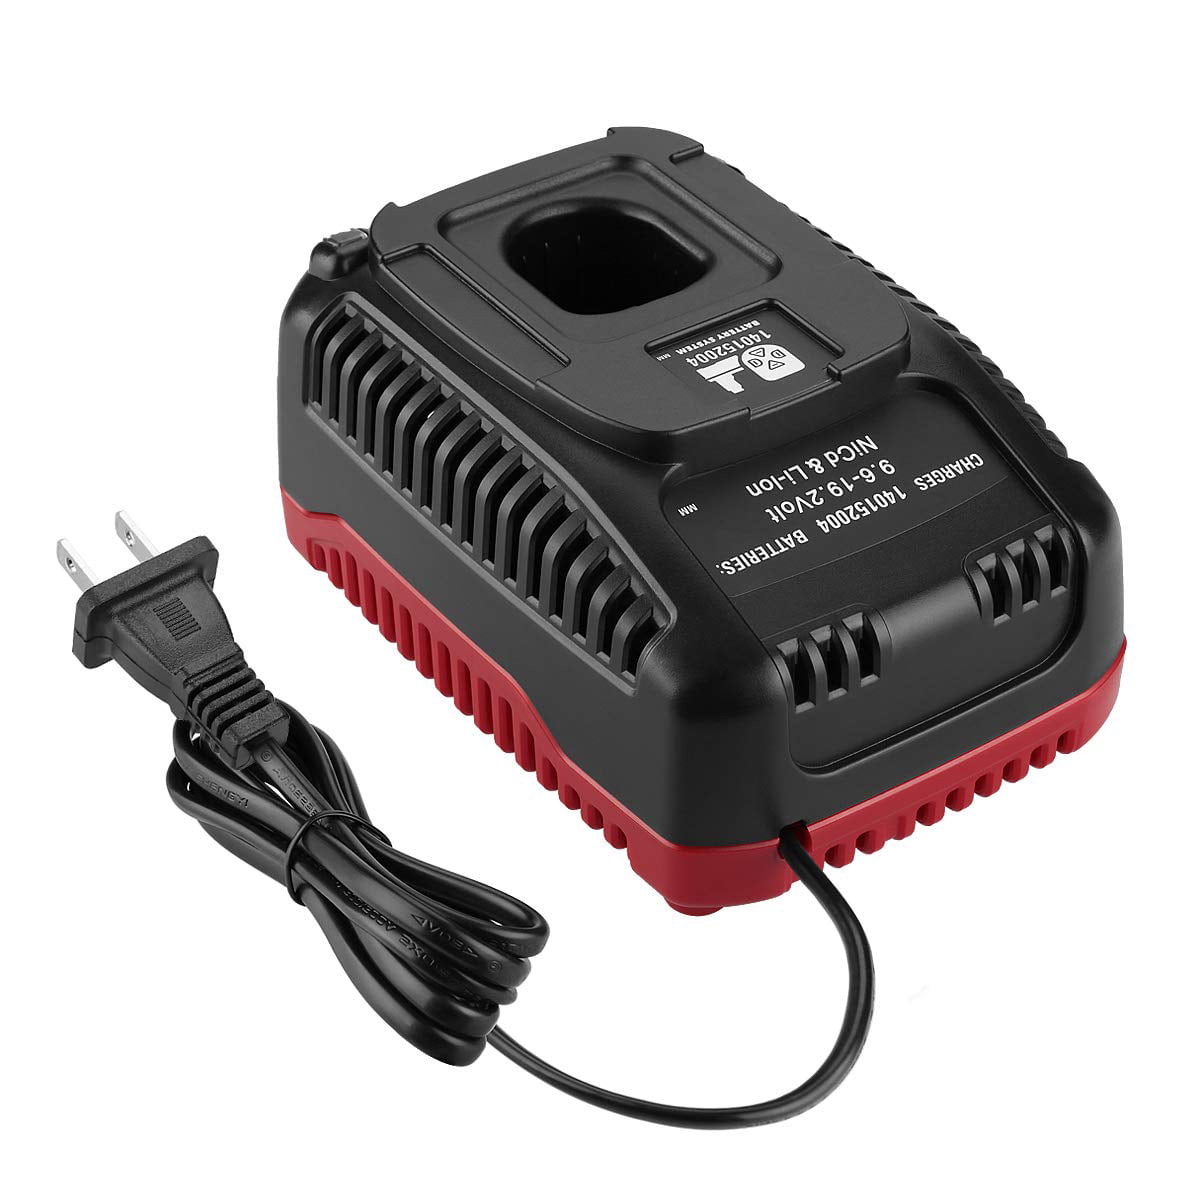 Craftsman 12V-19.2V Lithium-ion Ni-Cd Battery Charger 315.CH2030 Works Great 